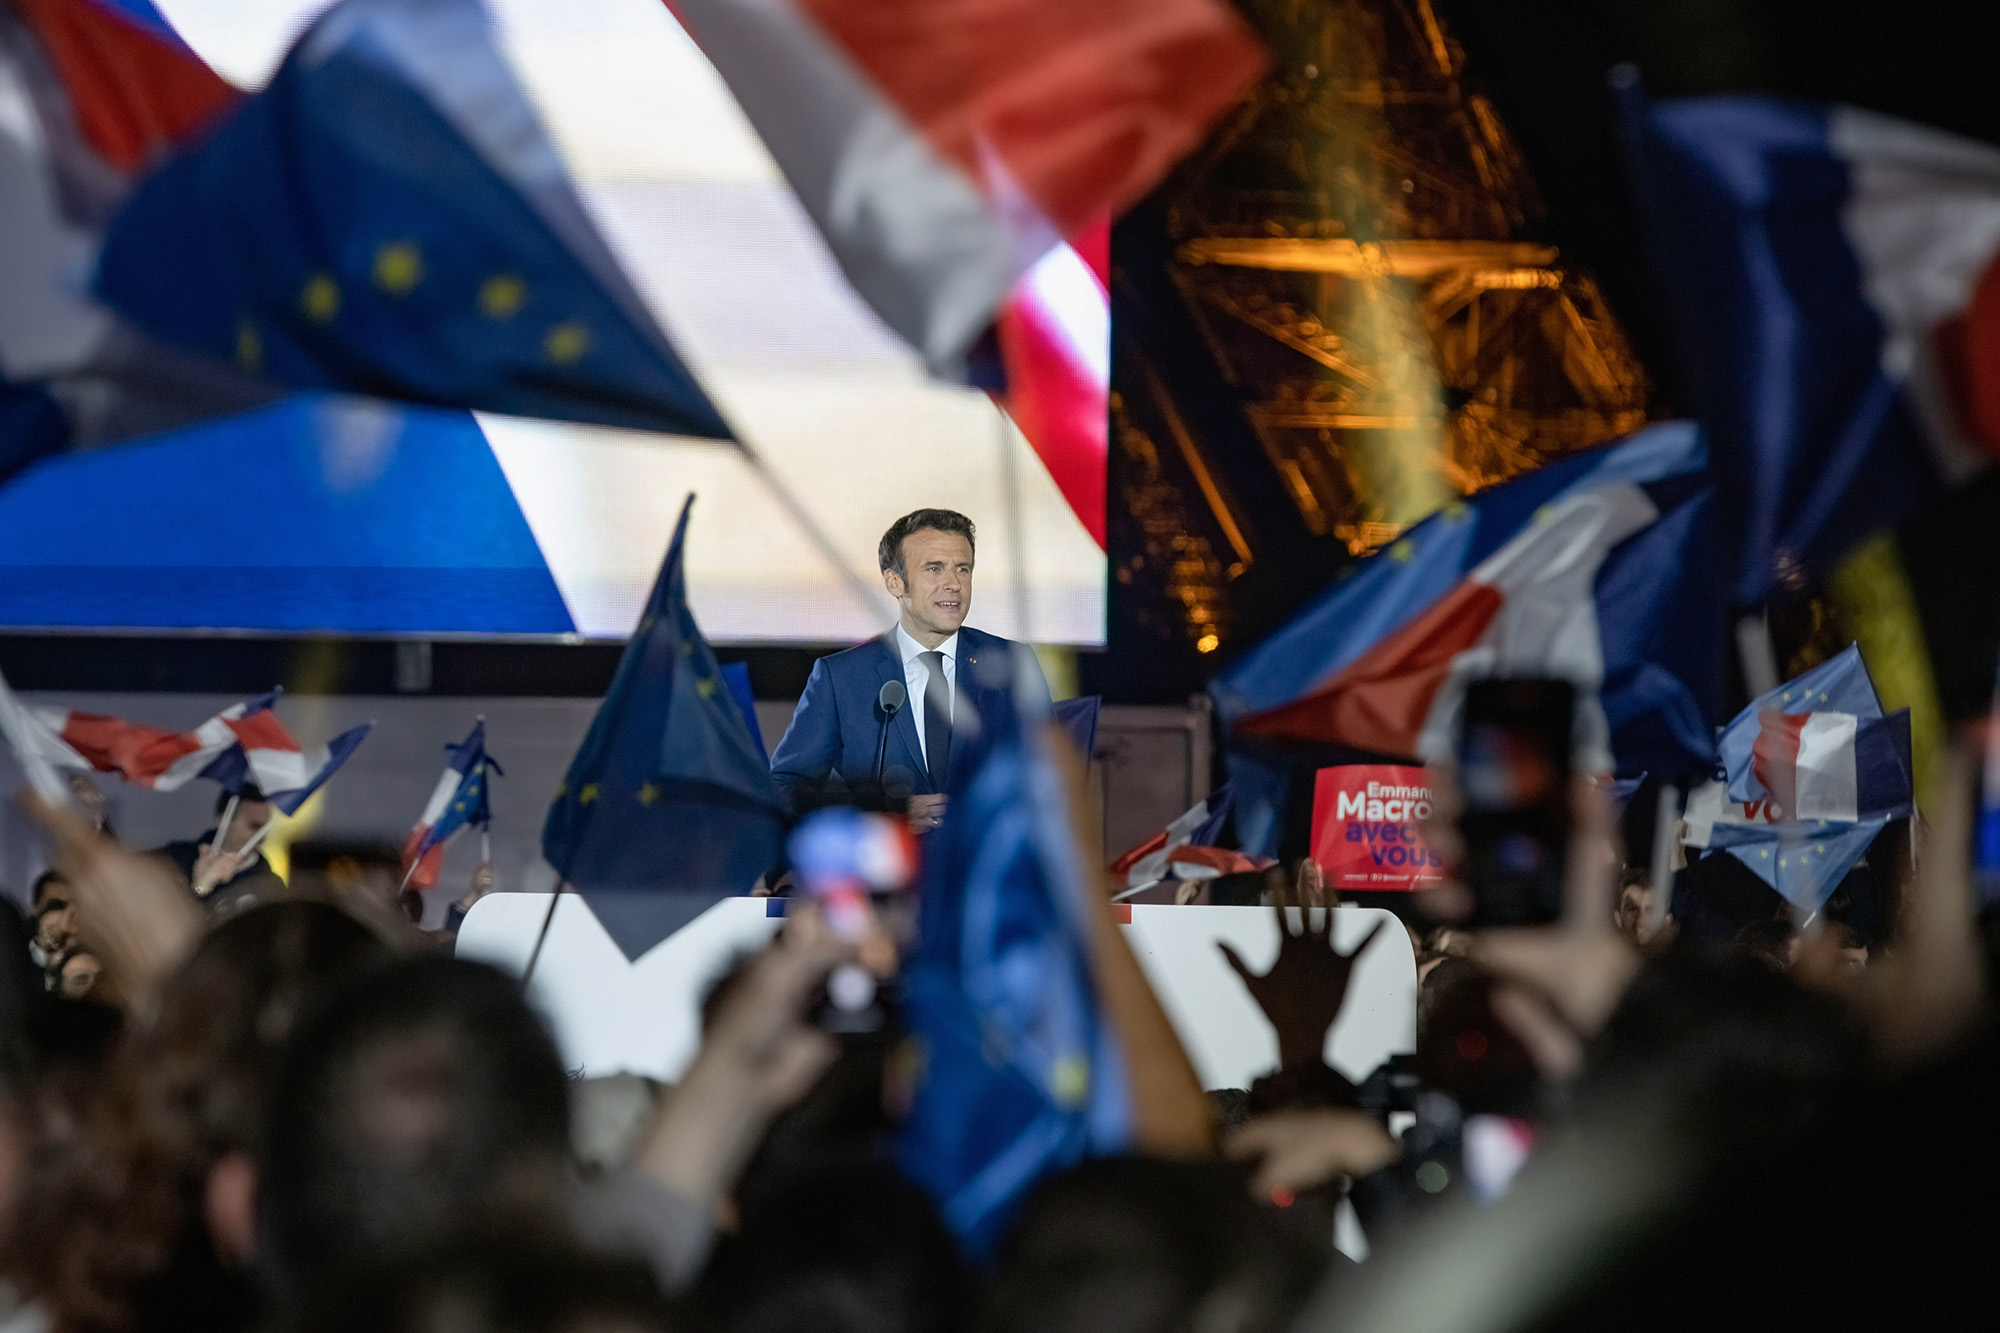 French President Emmanuel Macron celebrates with thousands of his supporters in front of the Eiffel Tower, Paris, France, as he wins the French presidential election on April 24.